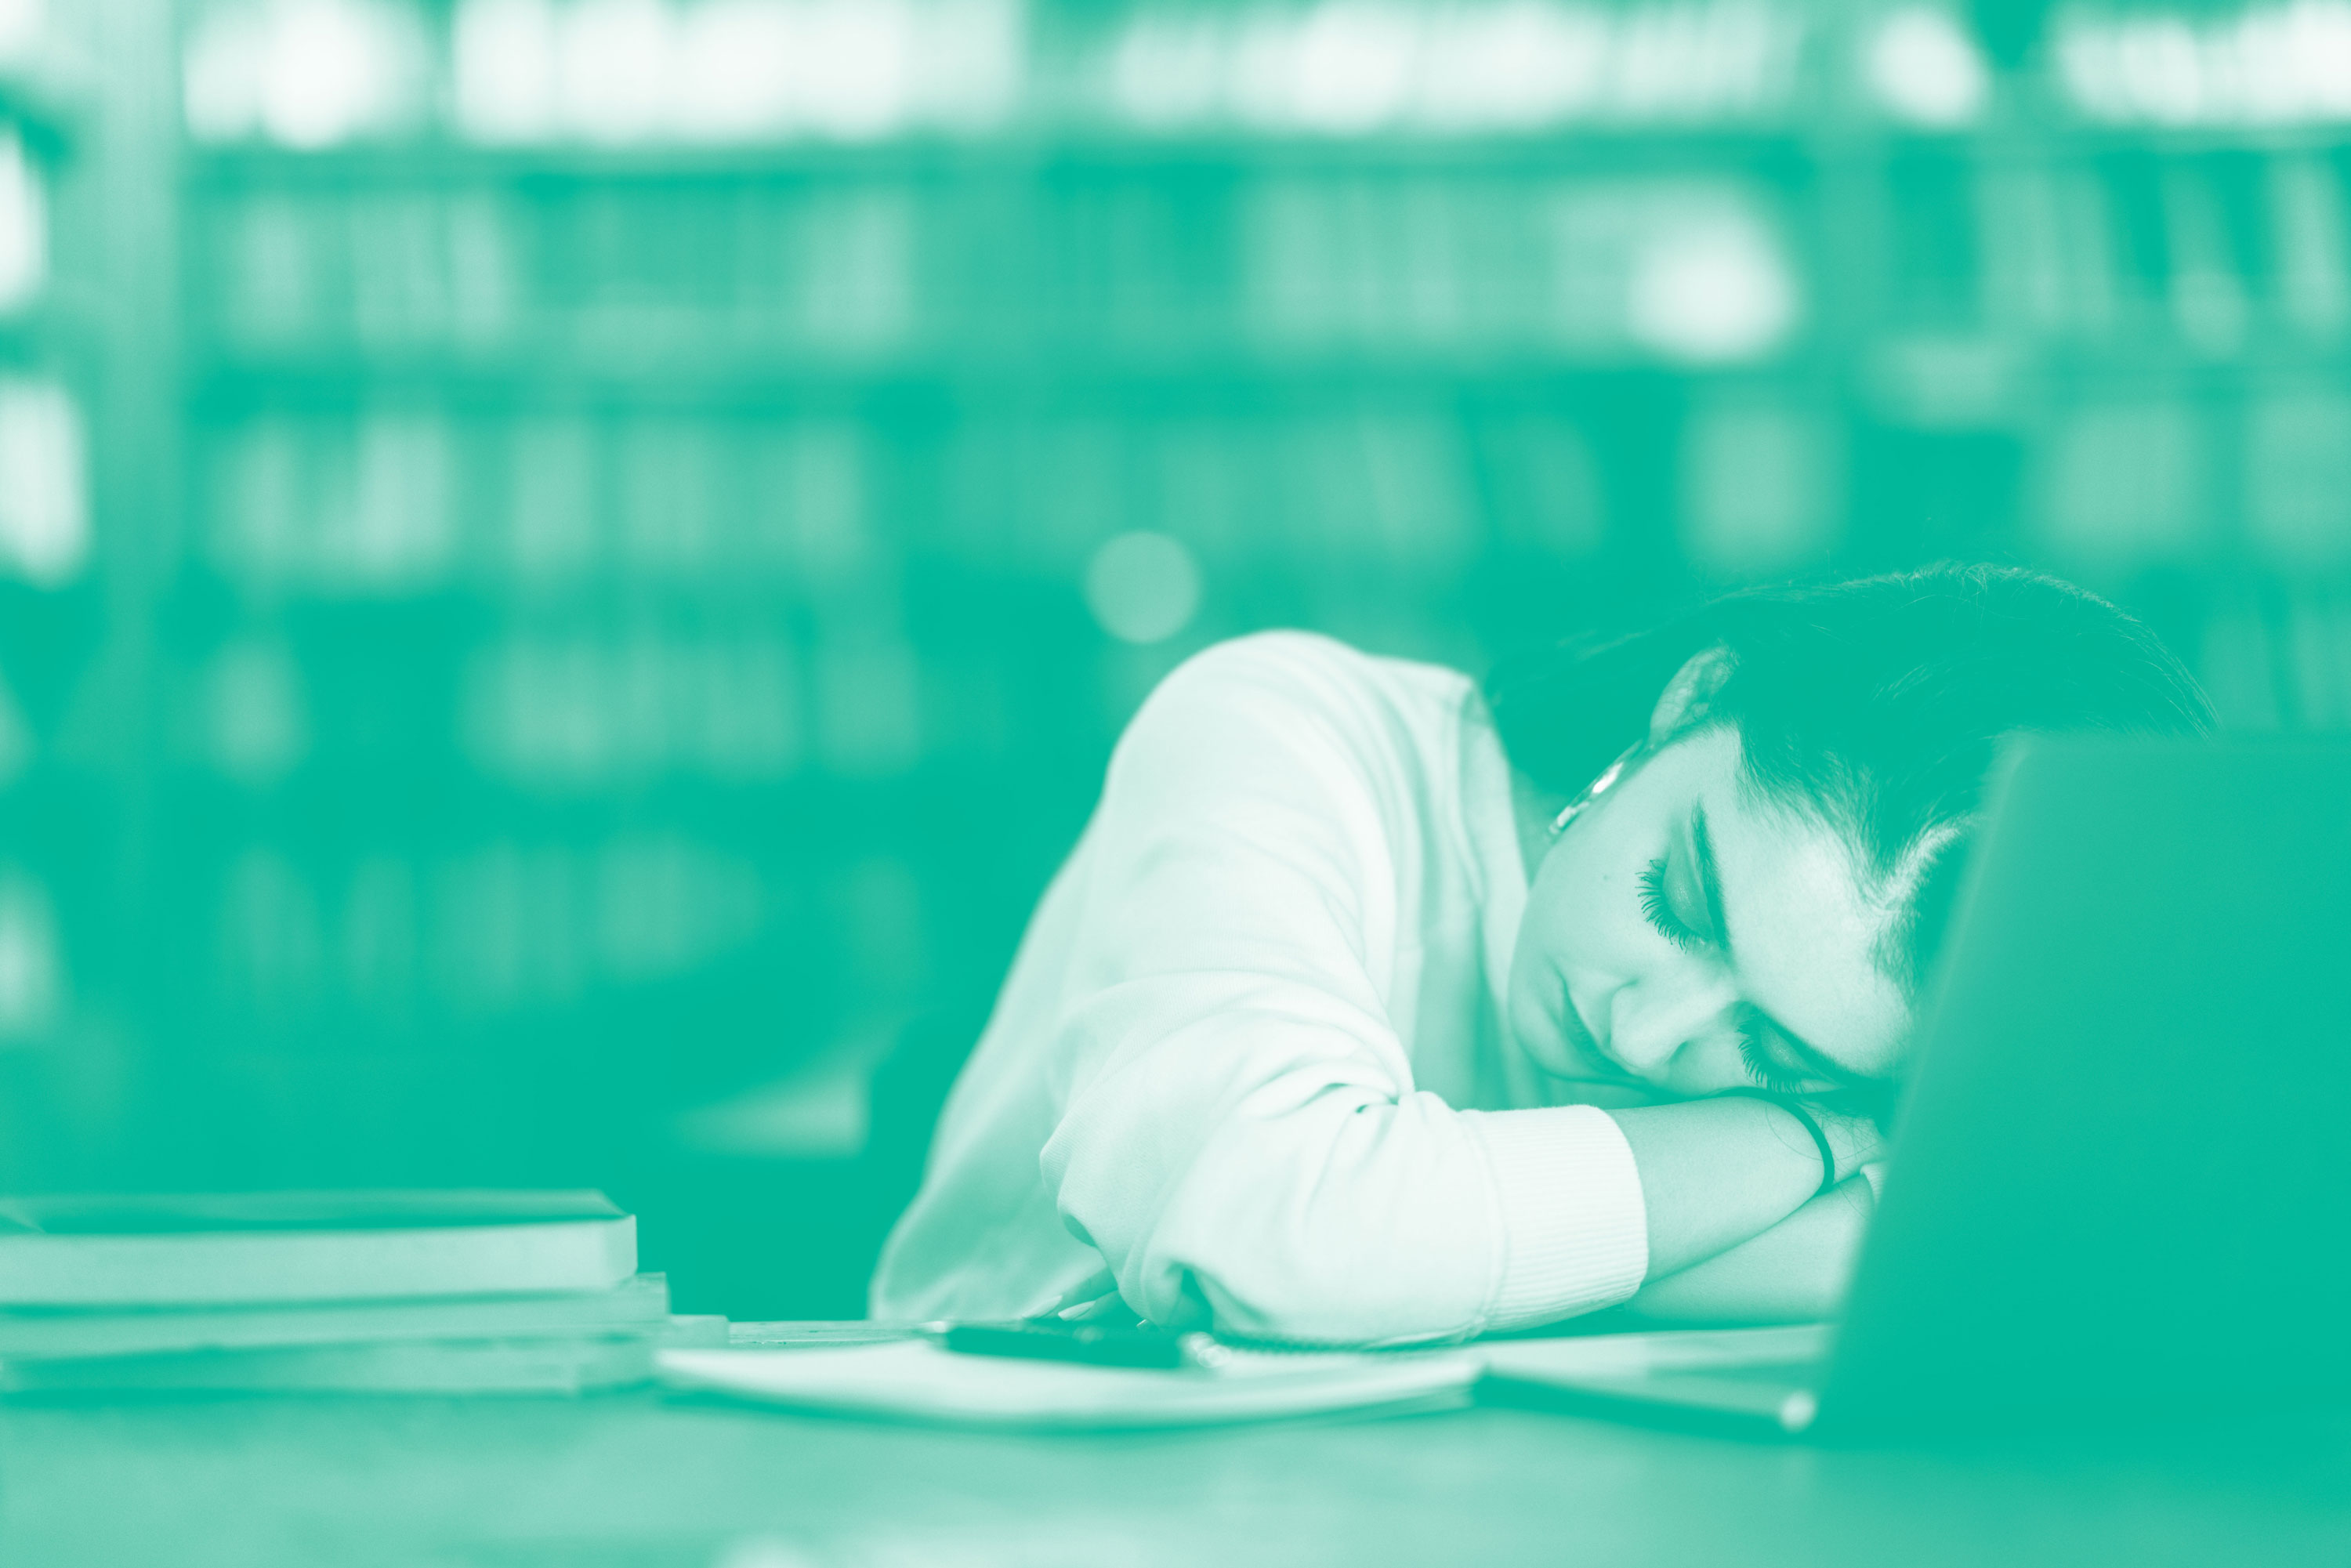 A woman sleeping by books and a laptop